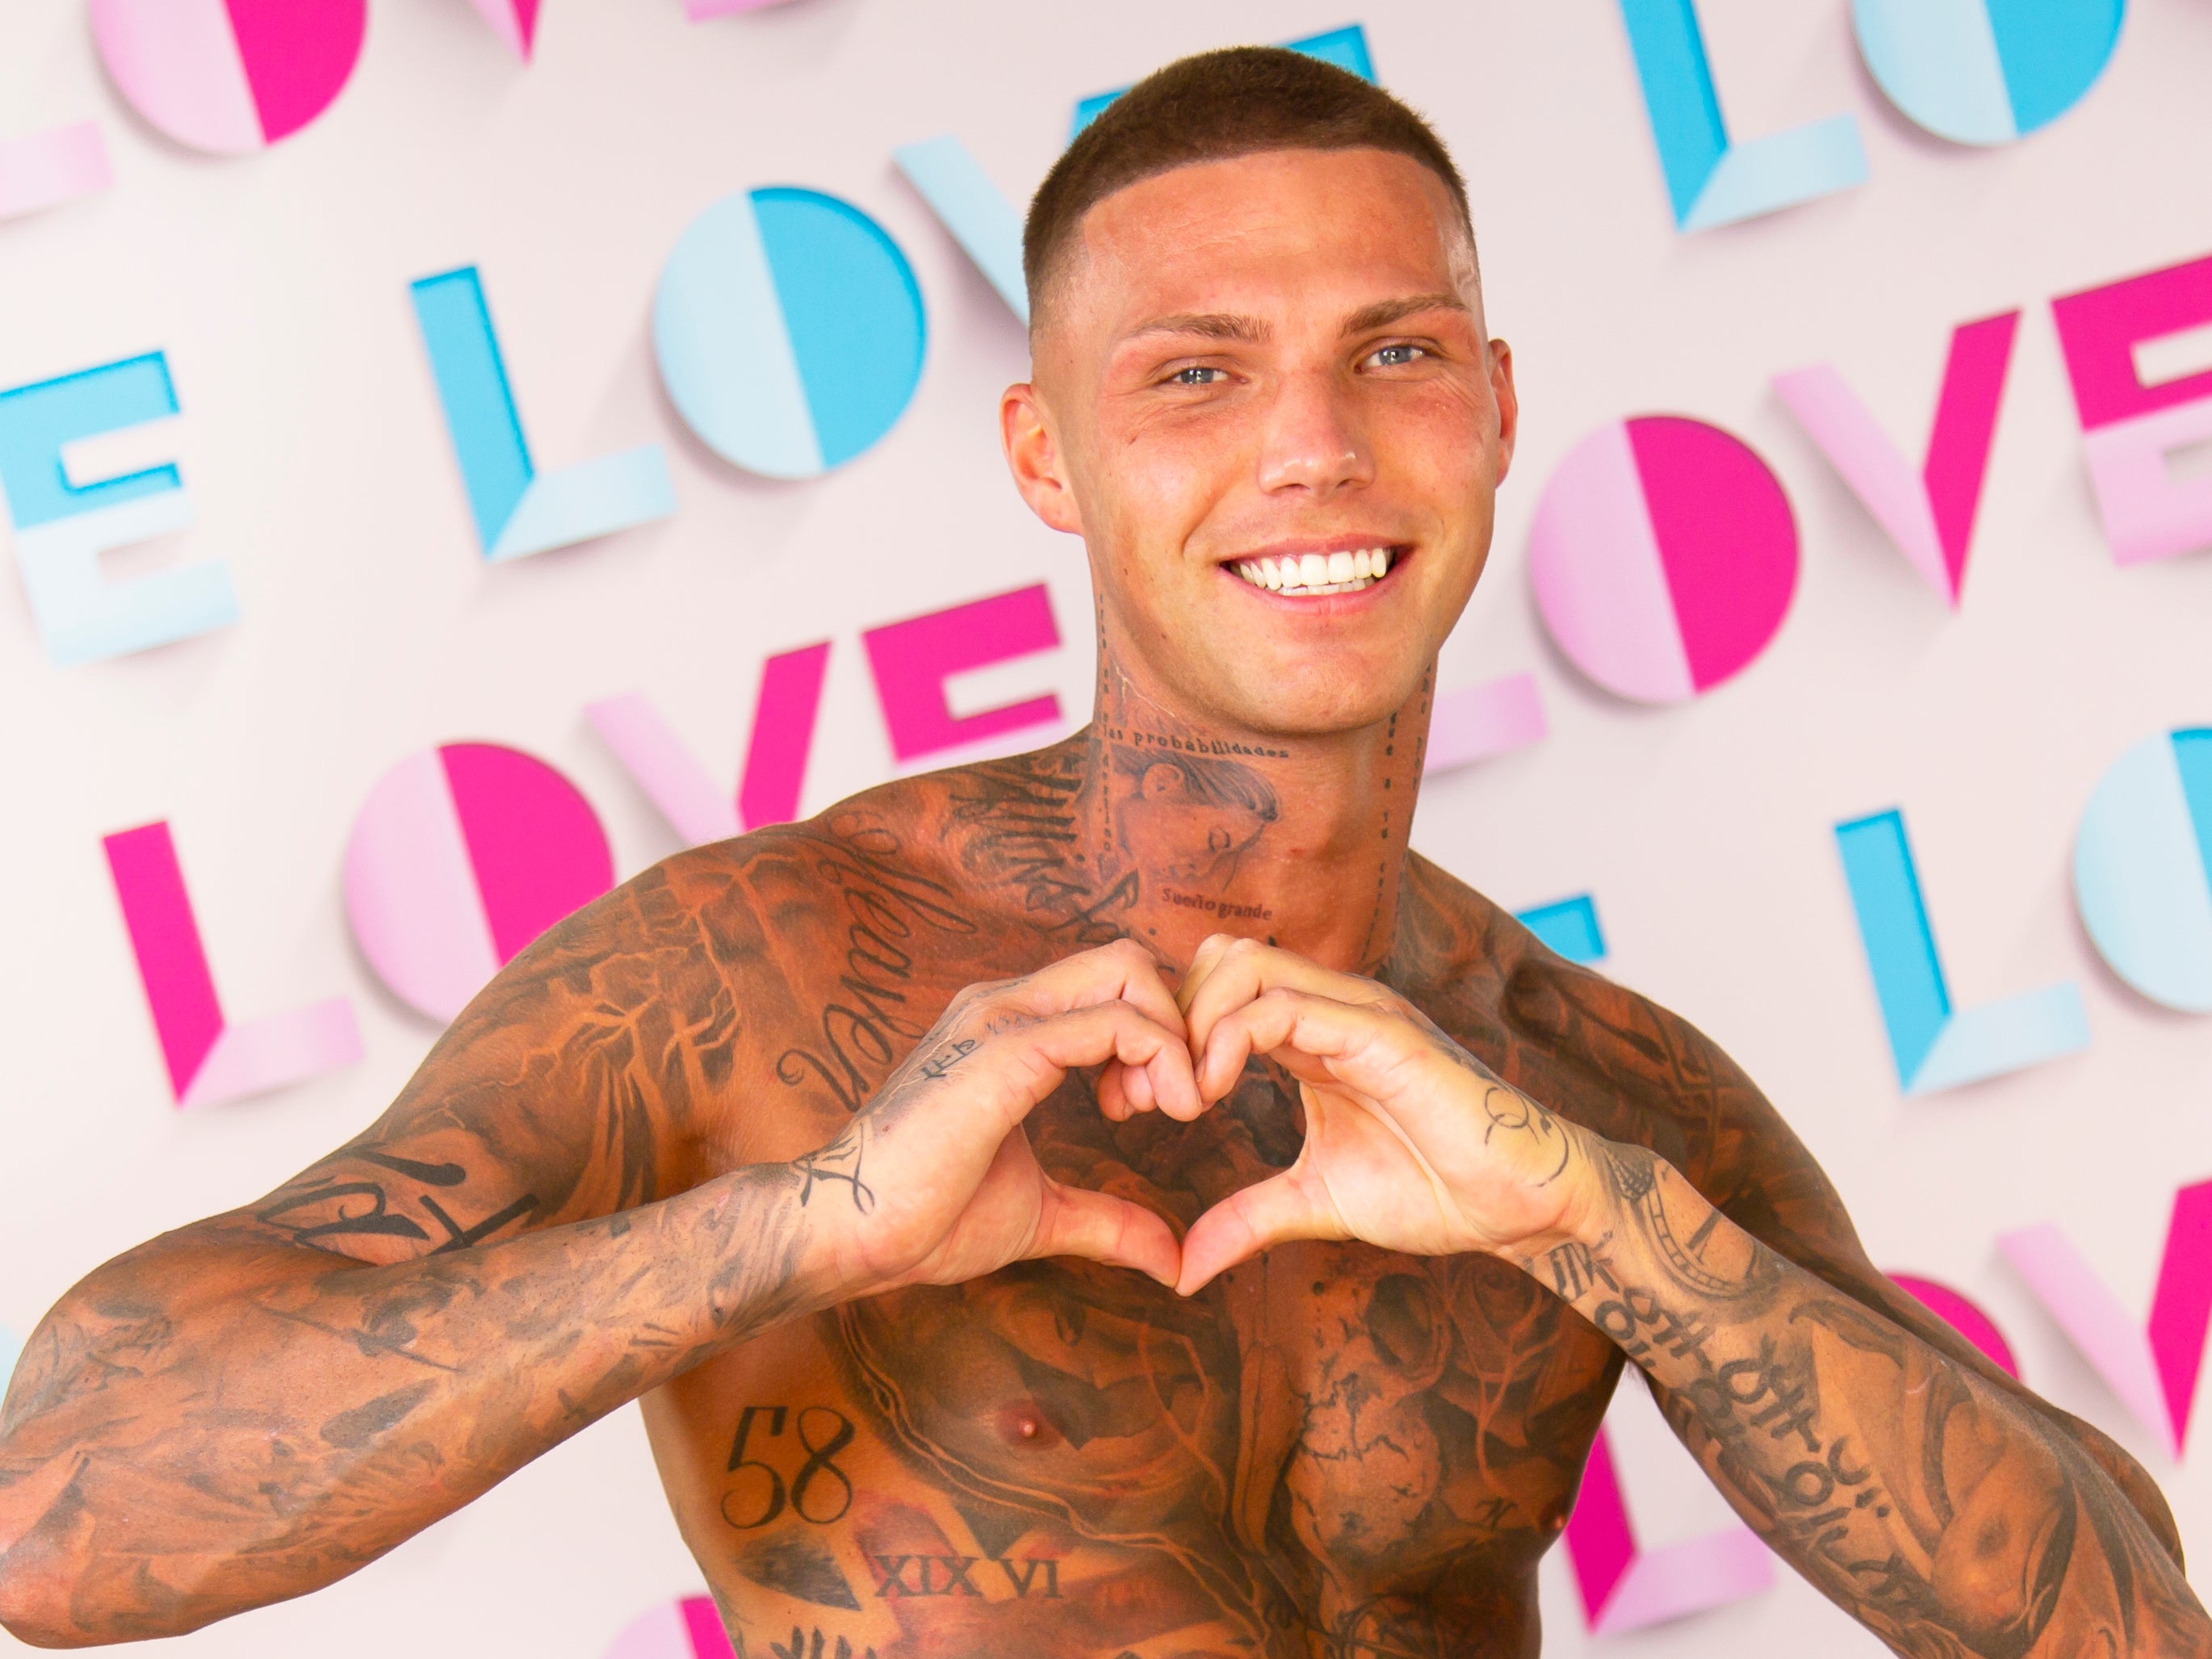 Danny Bibby is the latest contestant to join ‘Love Island’ 2021